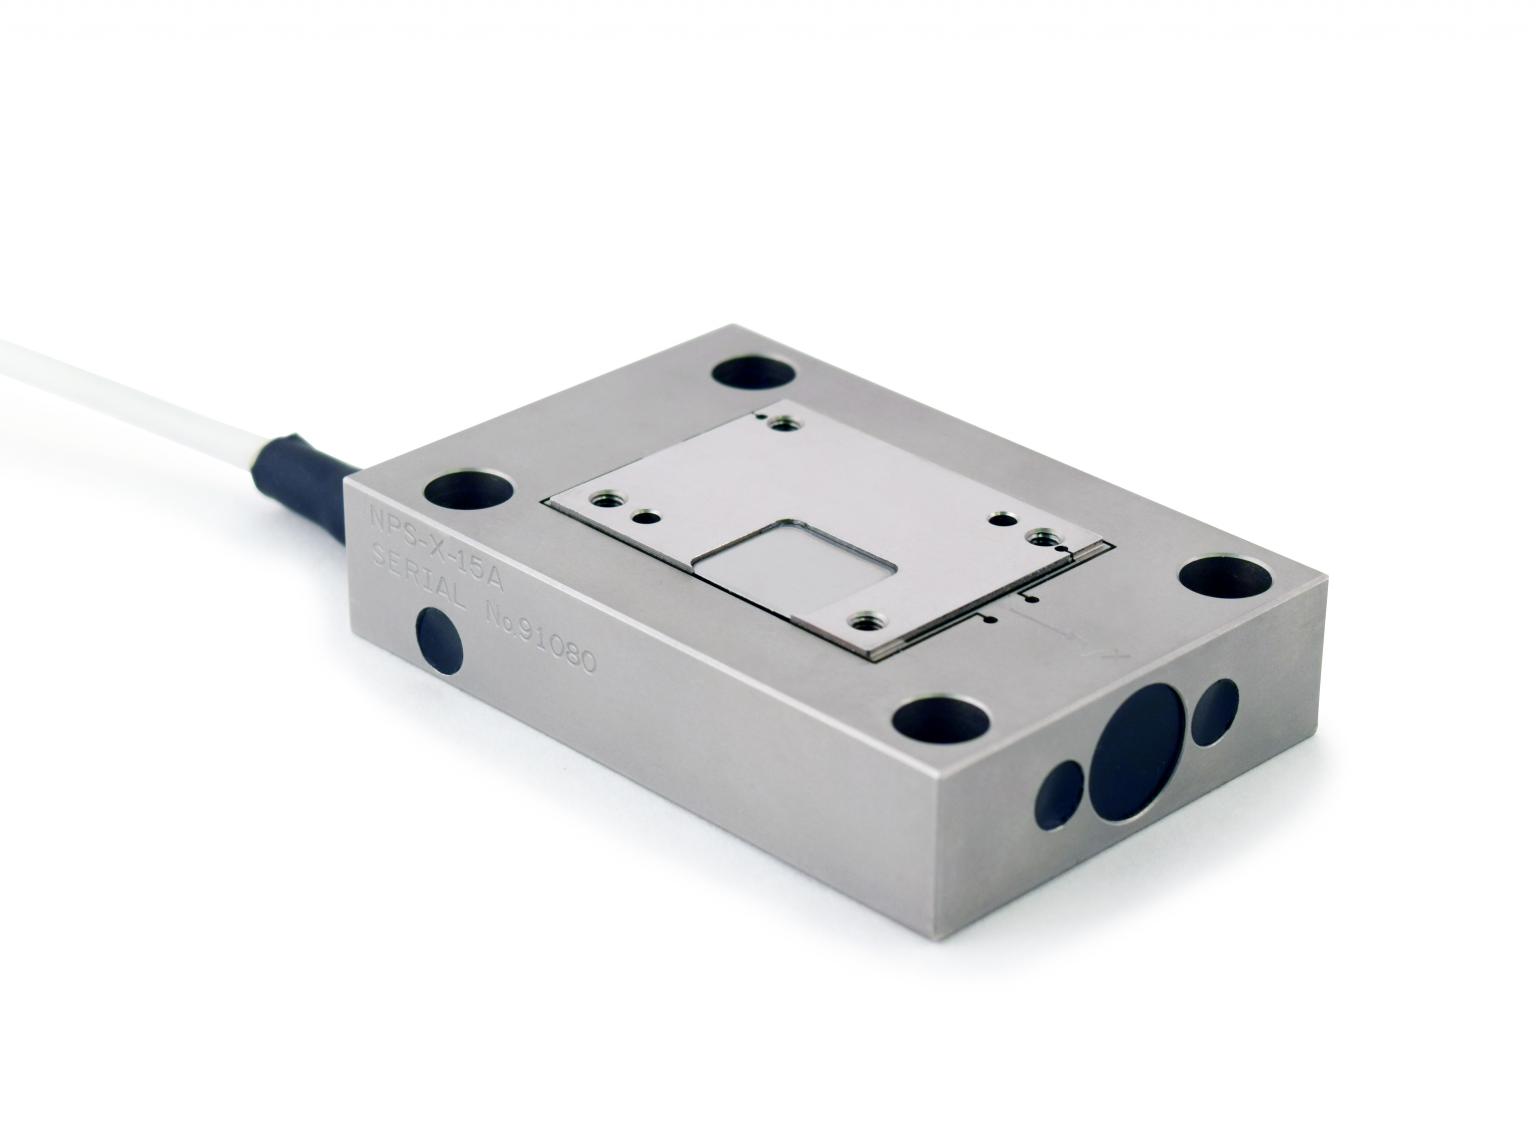 Queensgate leaders in state-of-the-art Nanopositioning solutions, provide bespoke products to meet customer requirements